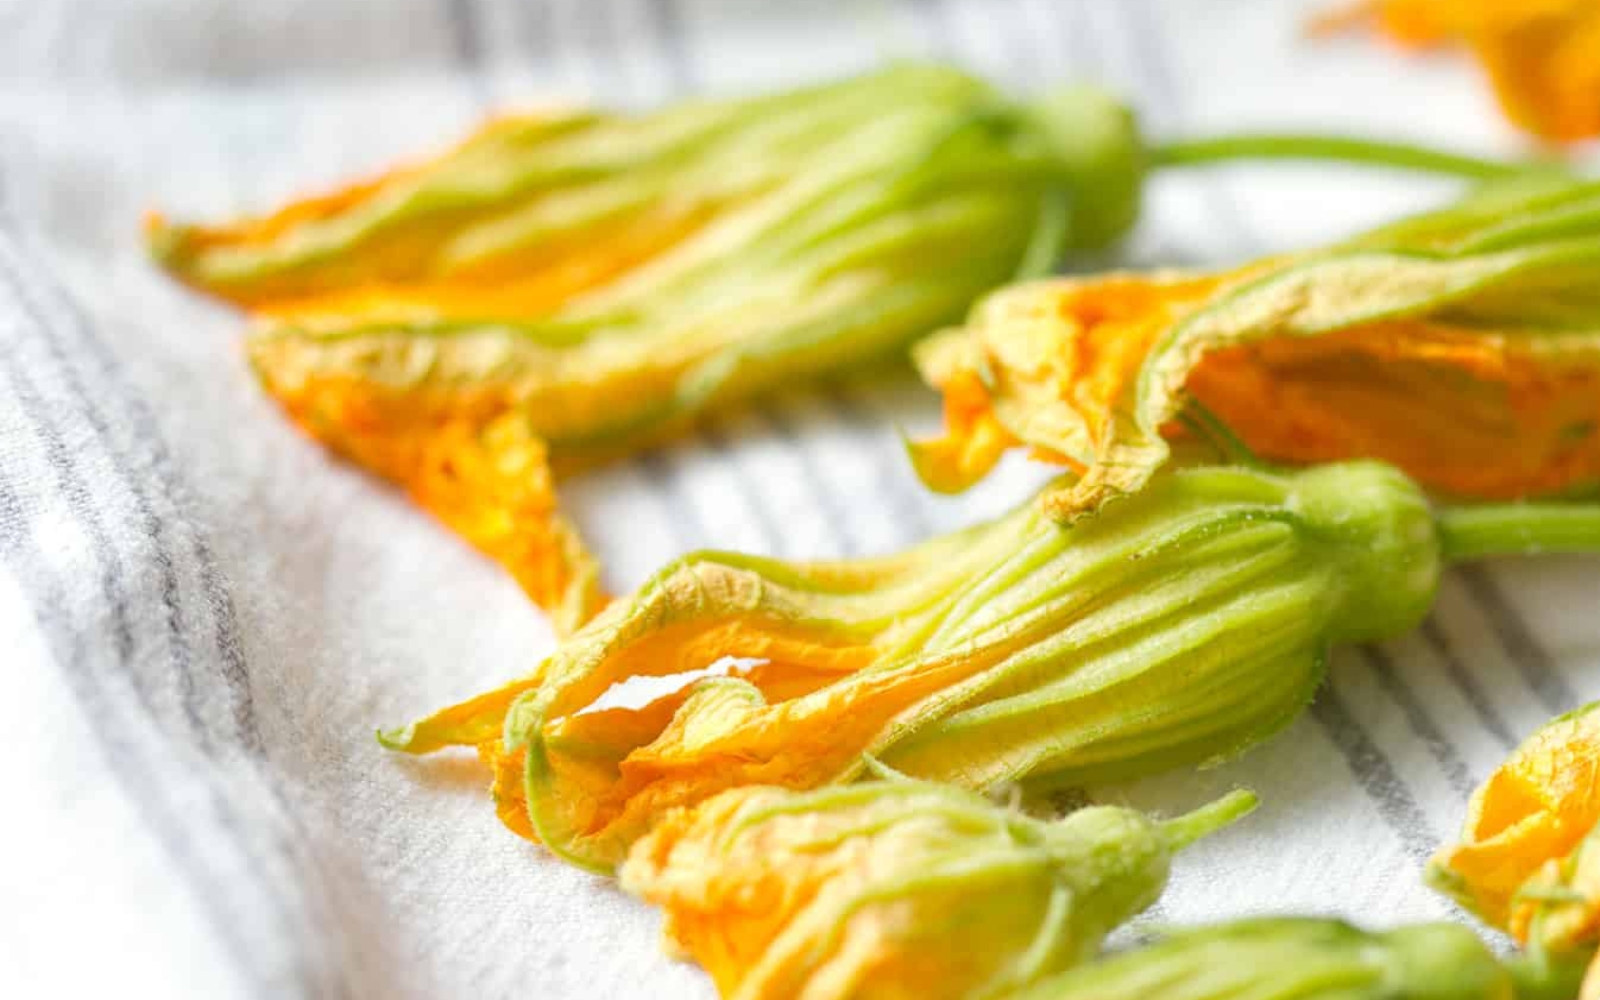 squash blossoms drying on a towel